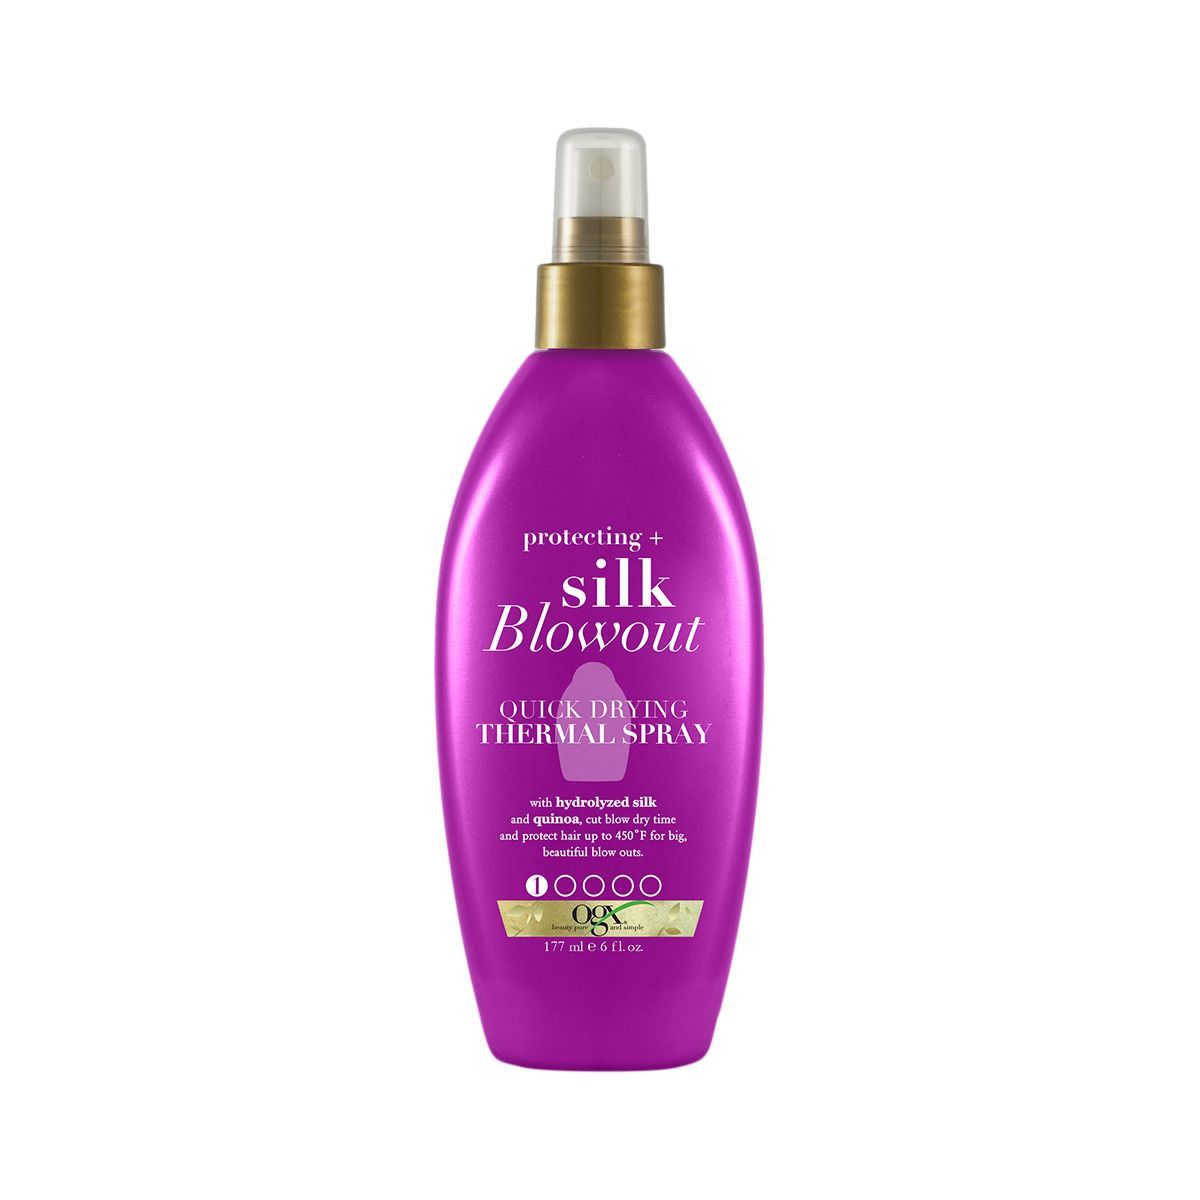 OGX Protecting + Silk Blowout Quick Drying Thermal Spray - 6 fl oz | Target